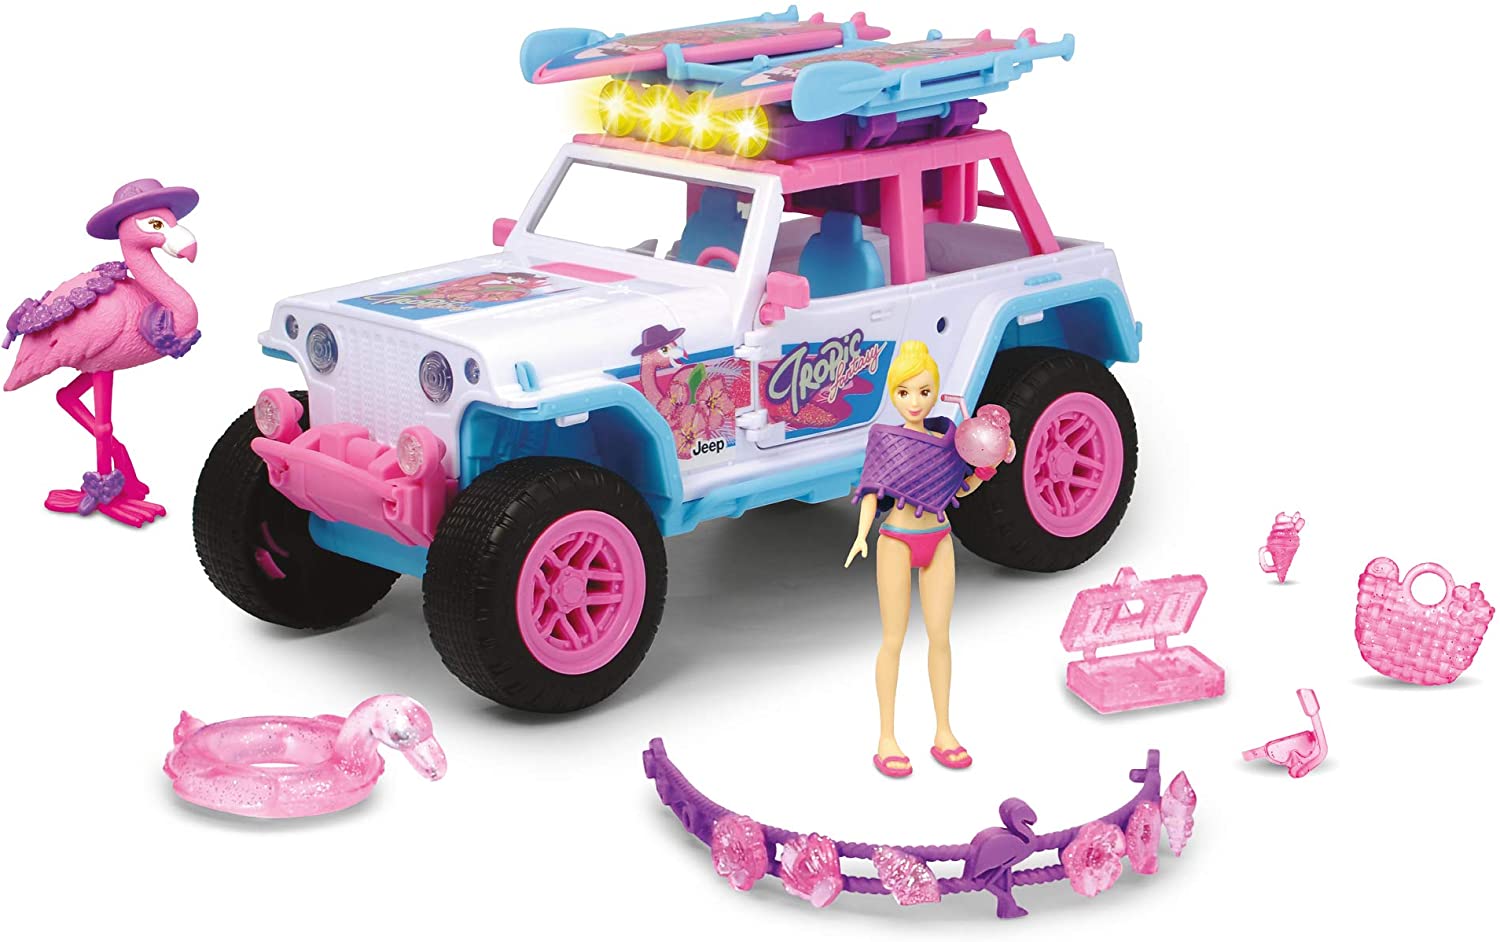 Dickie Toys 203185000 Pink Drivez Jeep, Toy Off-Road Vehicle With Lots Of A